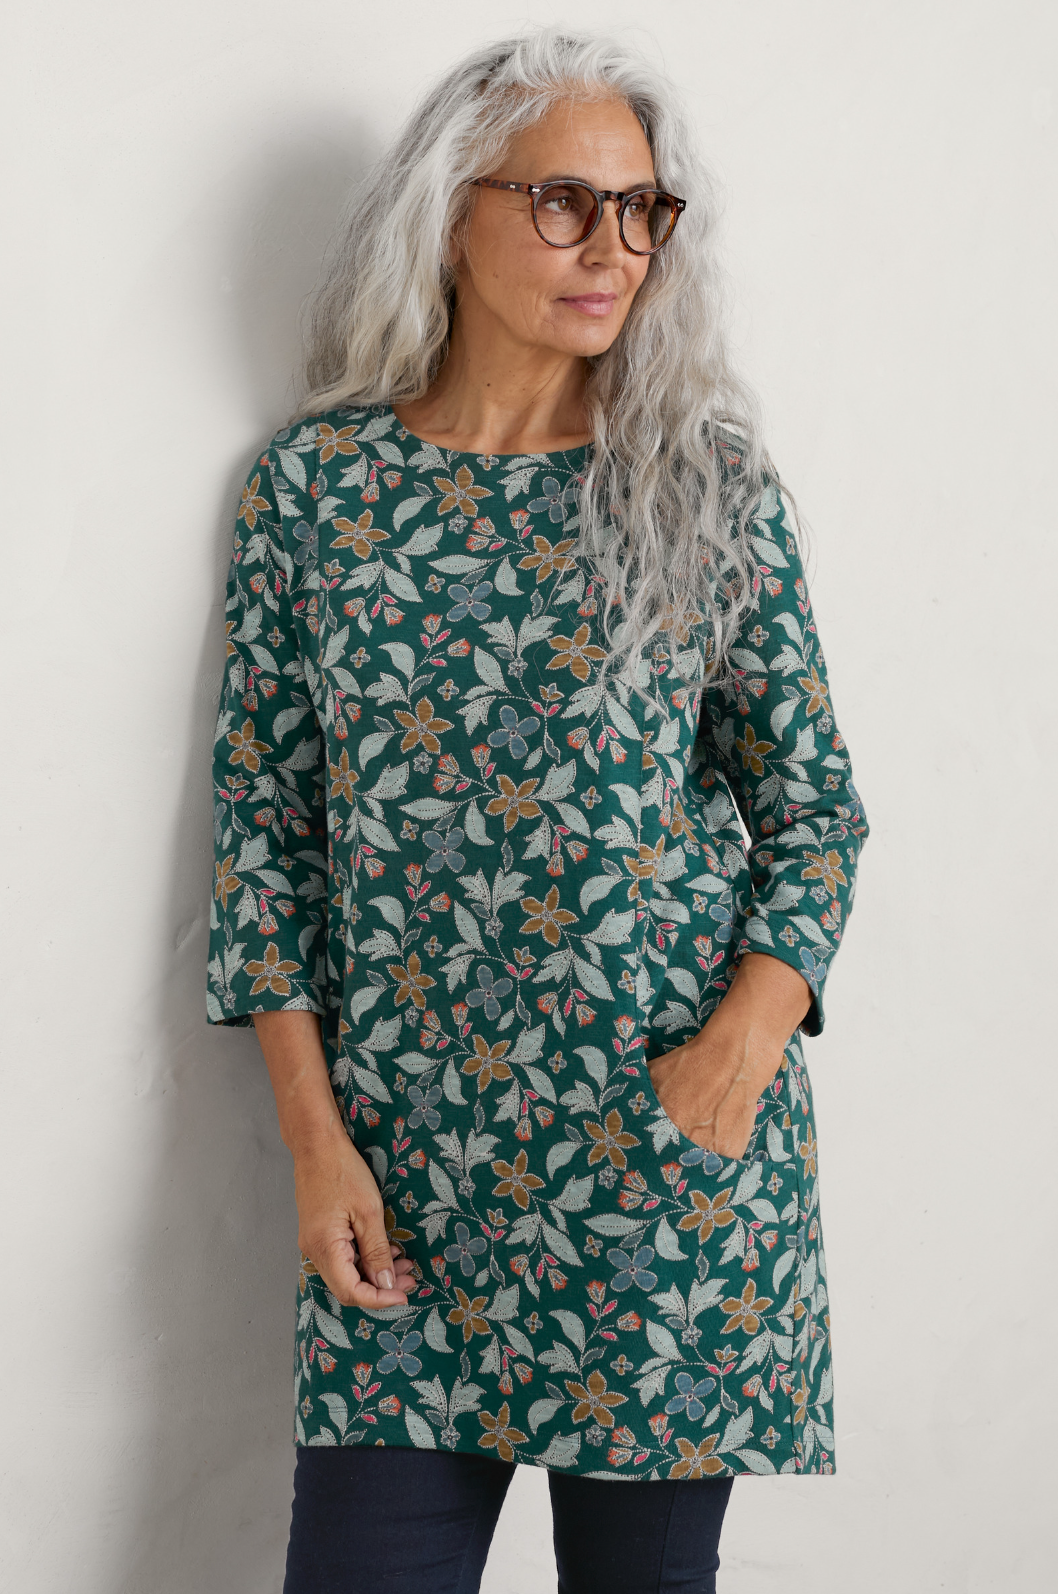 Seasalt Shore Foraging Tunic in Stitched Clematis Loch